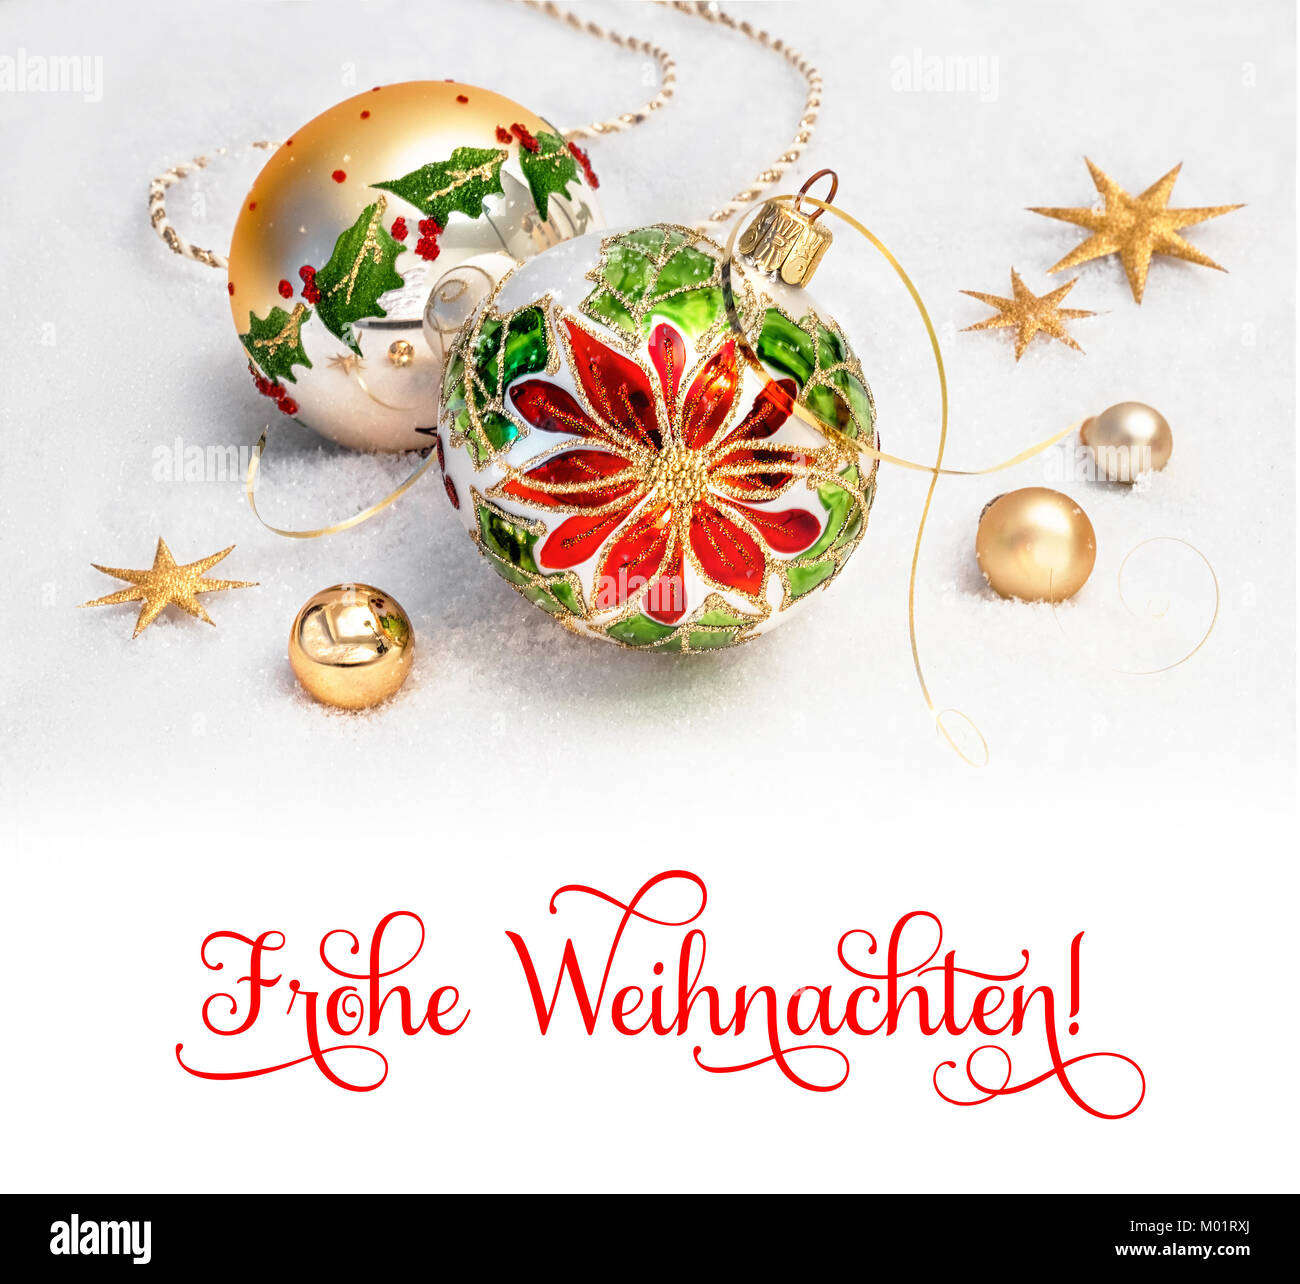 Christmas greeting card. Christmas baubles with poinsettia design and golden decorations on snow. Caption 'Frohe Weihnachten' ('Merry Christmas' in Ge Stock Photo